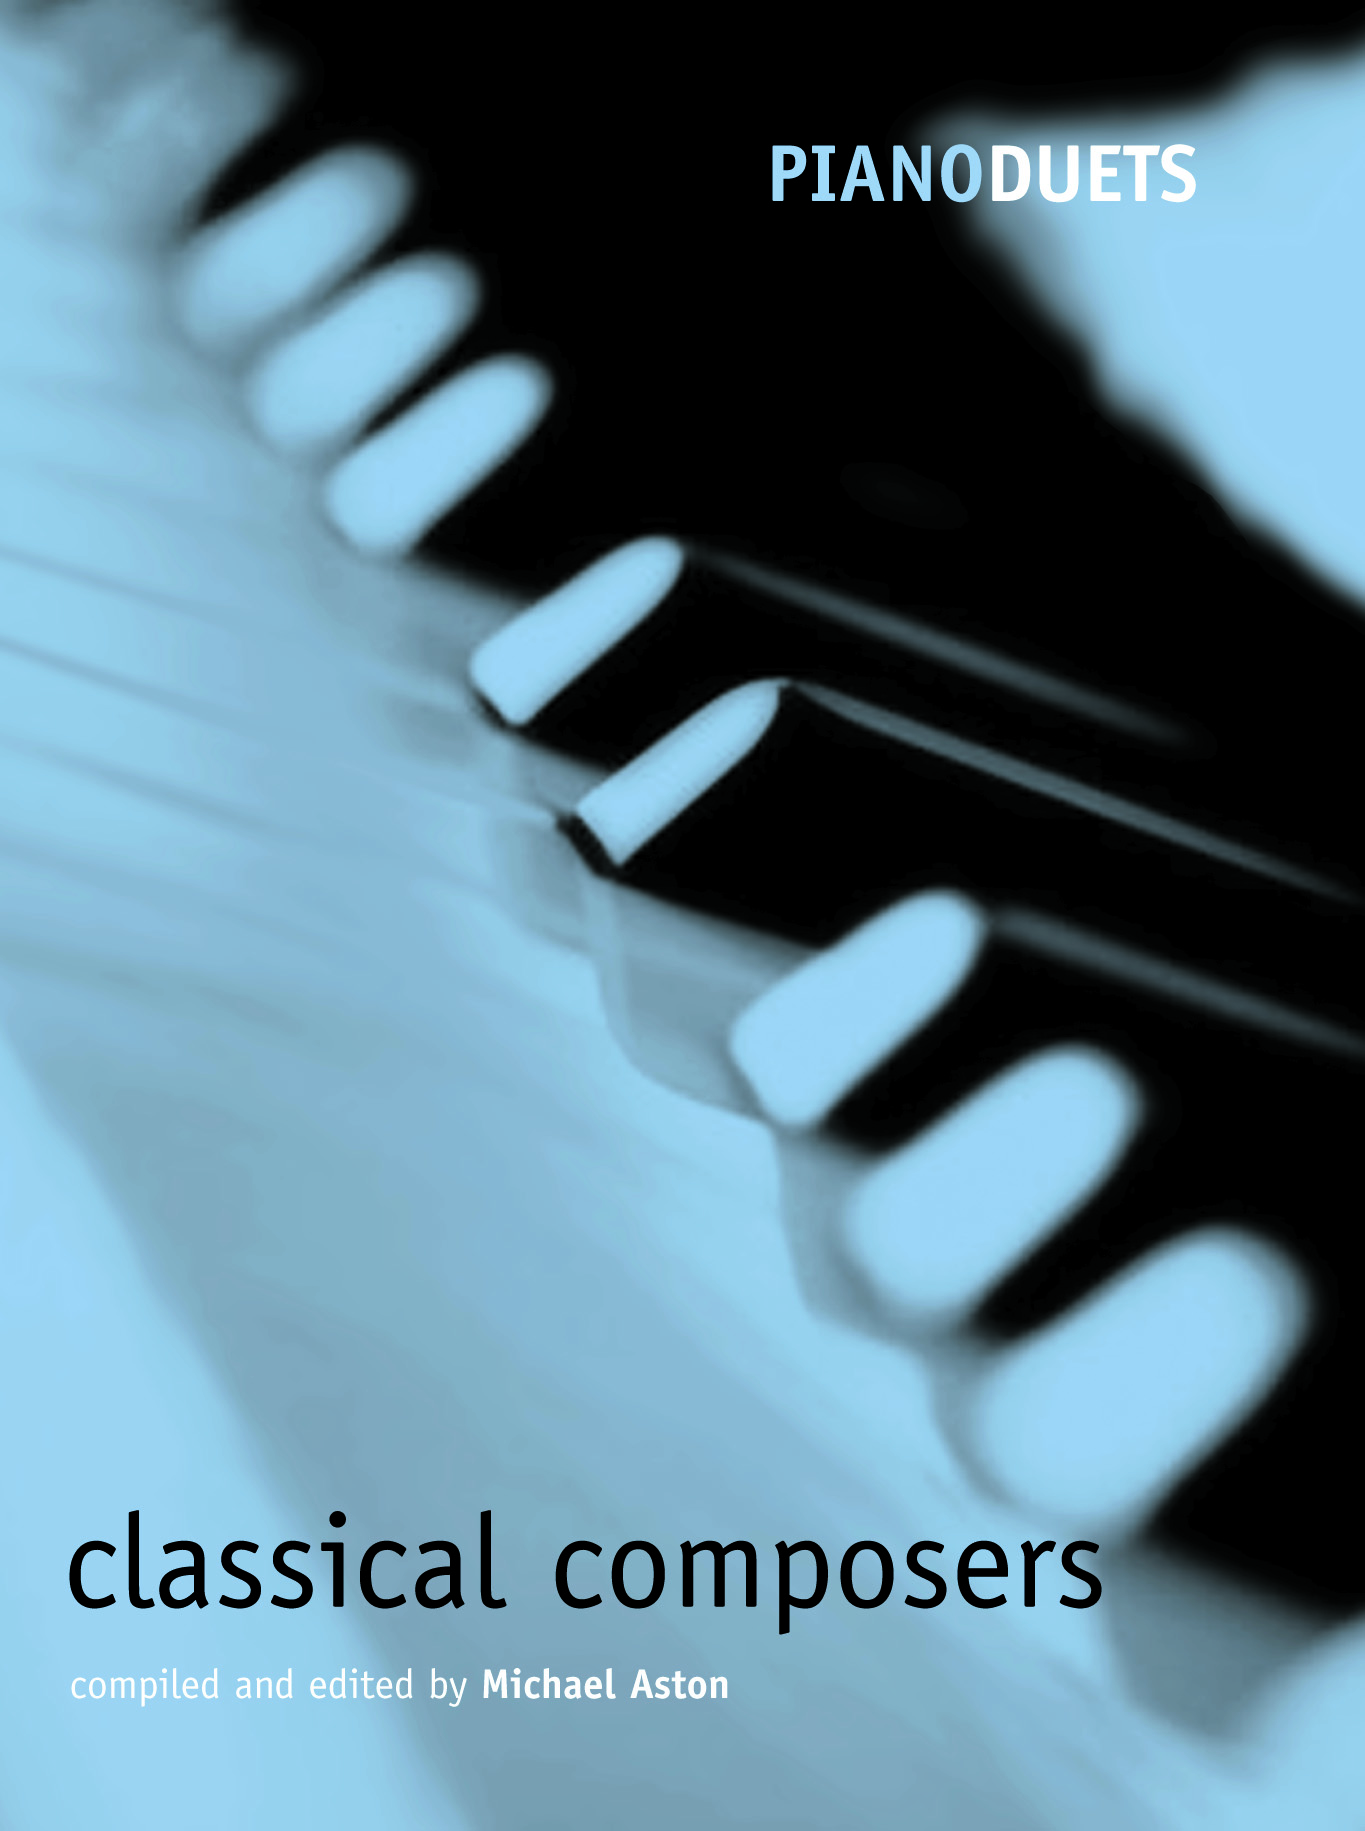 Piano Duets: Classical Composers (Aston)(4ms)